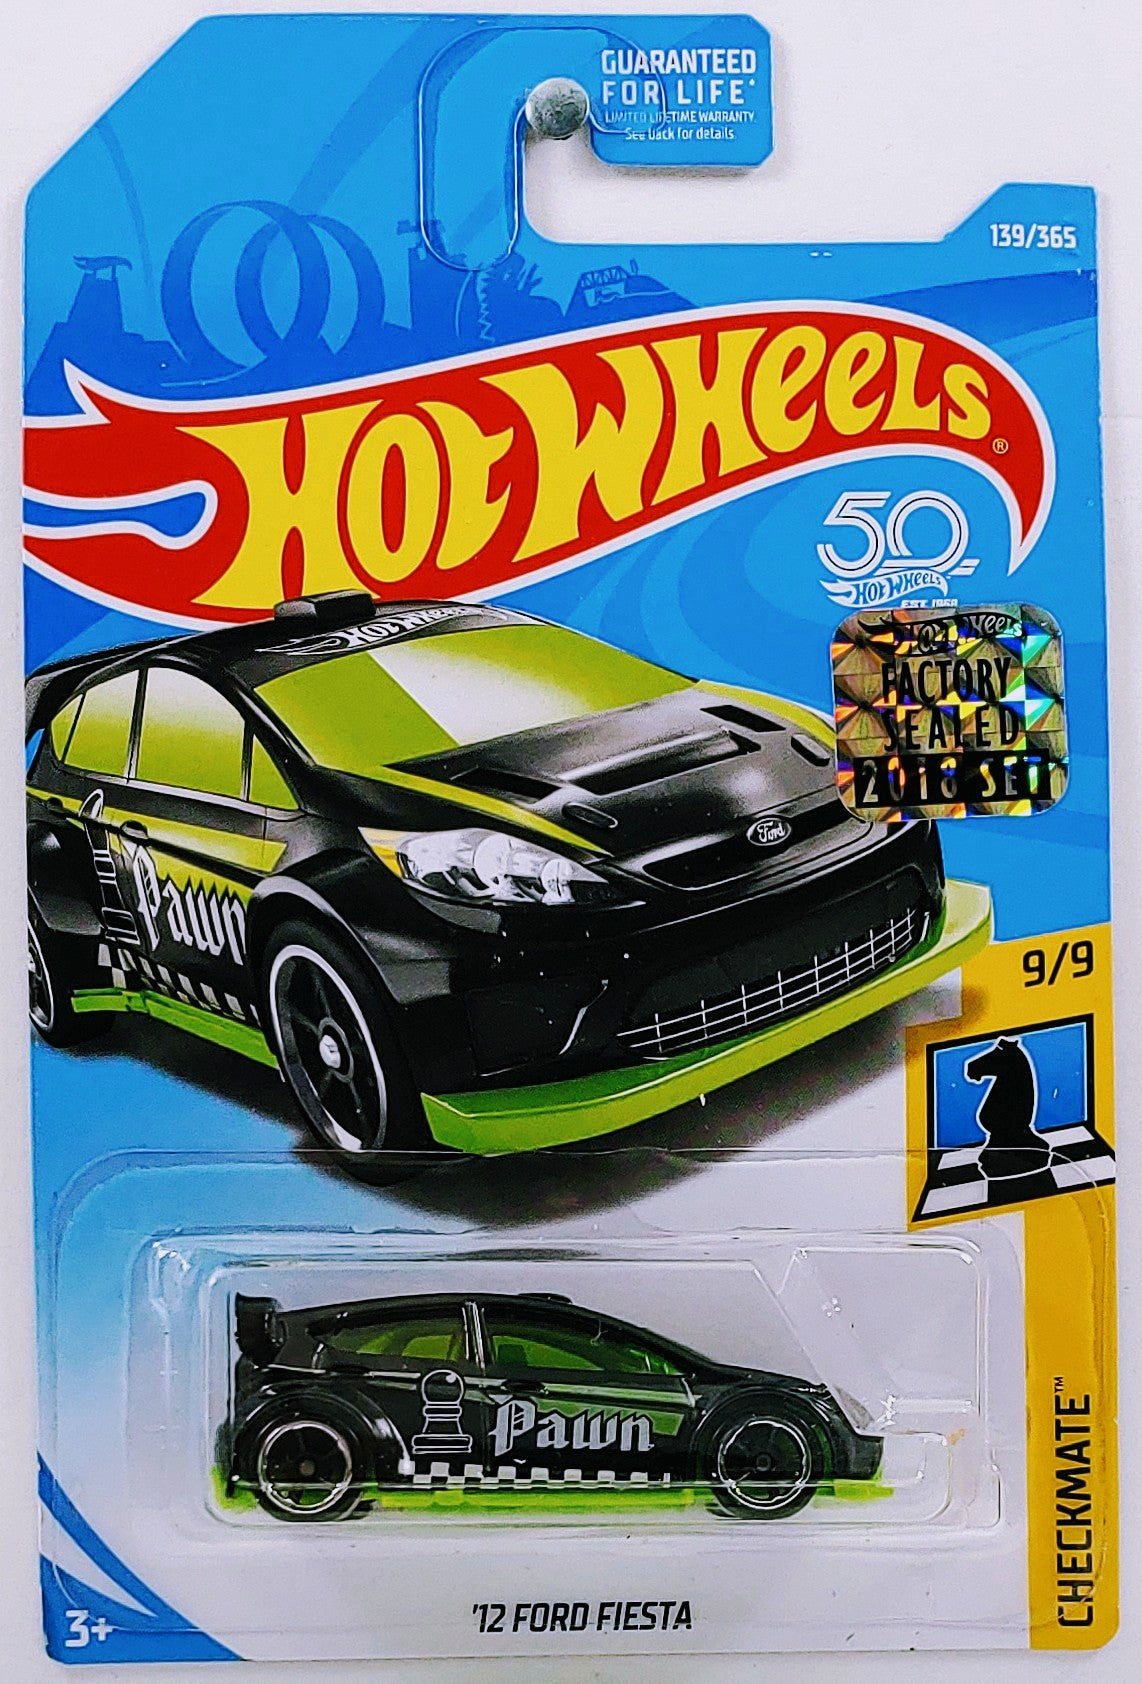 Hot Wheels 2018 - Collector # 139/365 - Checkmate 9/9 - '12 Ford Fiesta - Black / Pawn - FSC